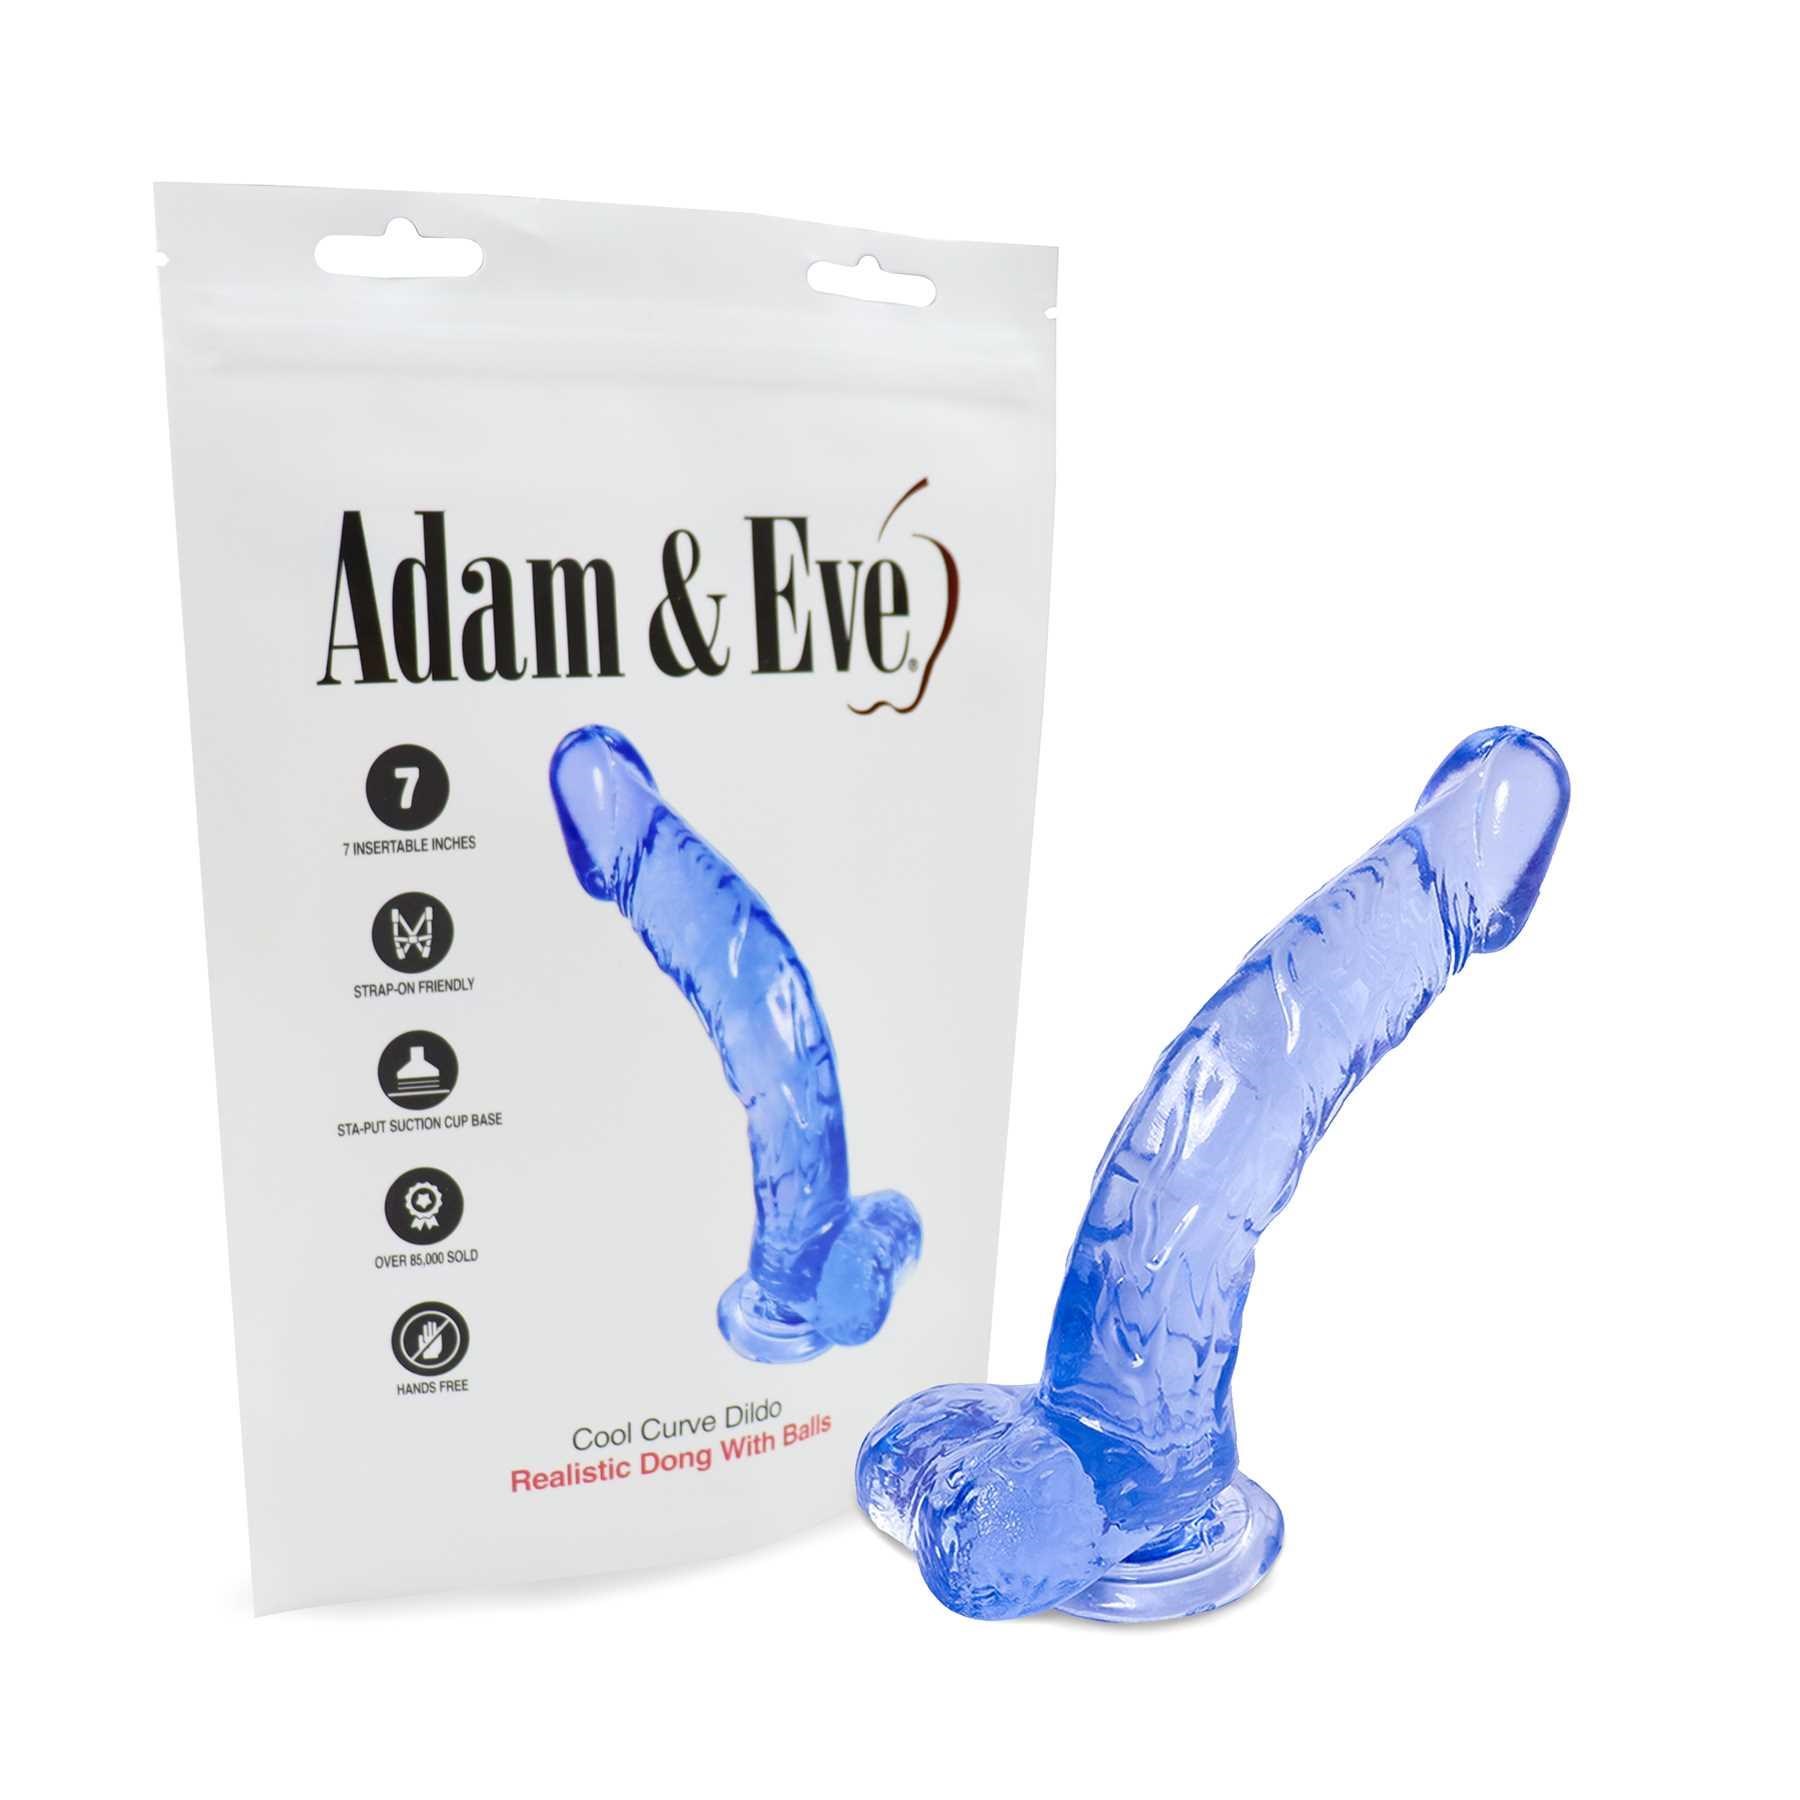 Cool Curve Jelly Dildo - Packaging